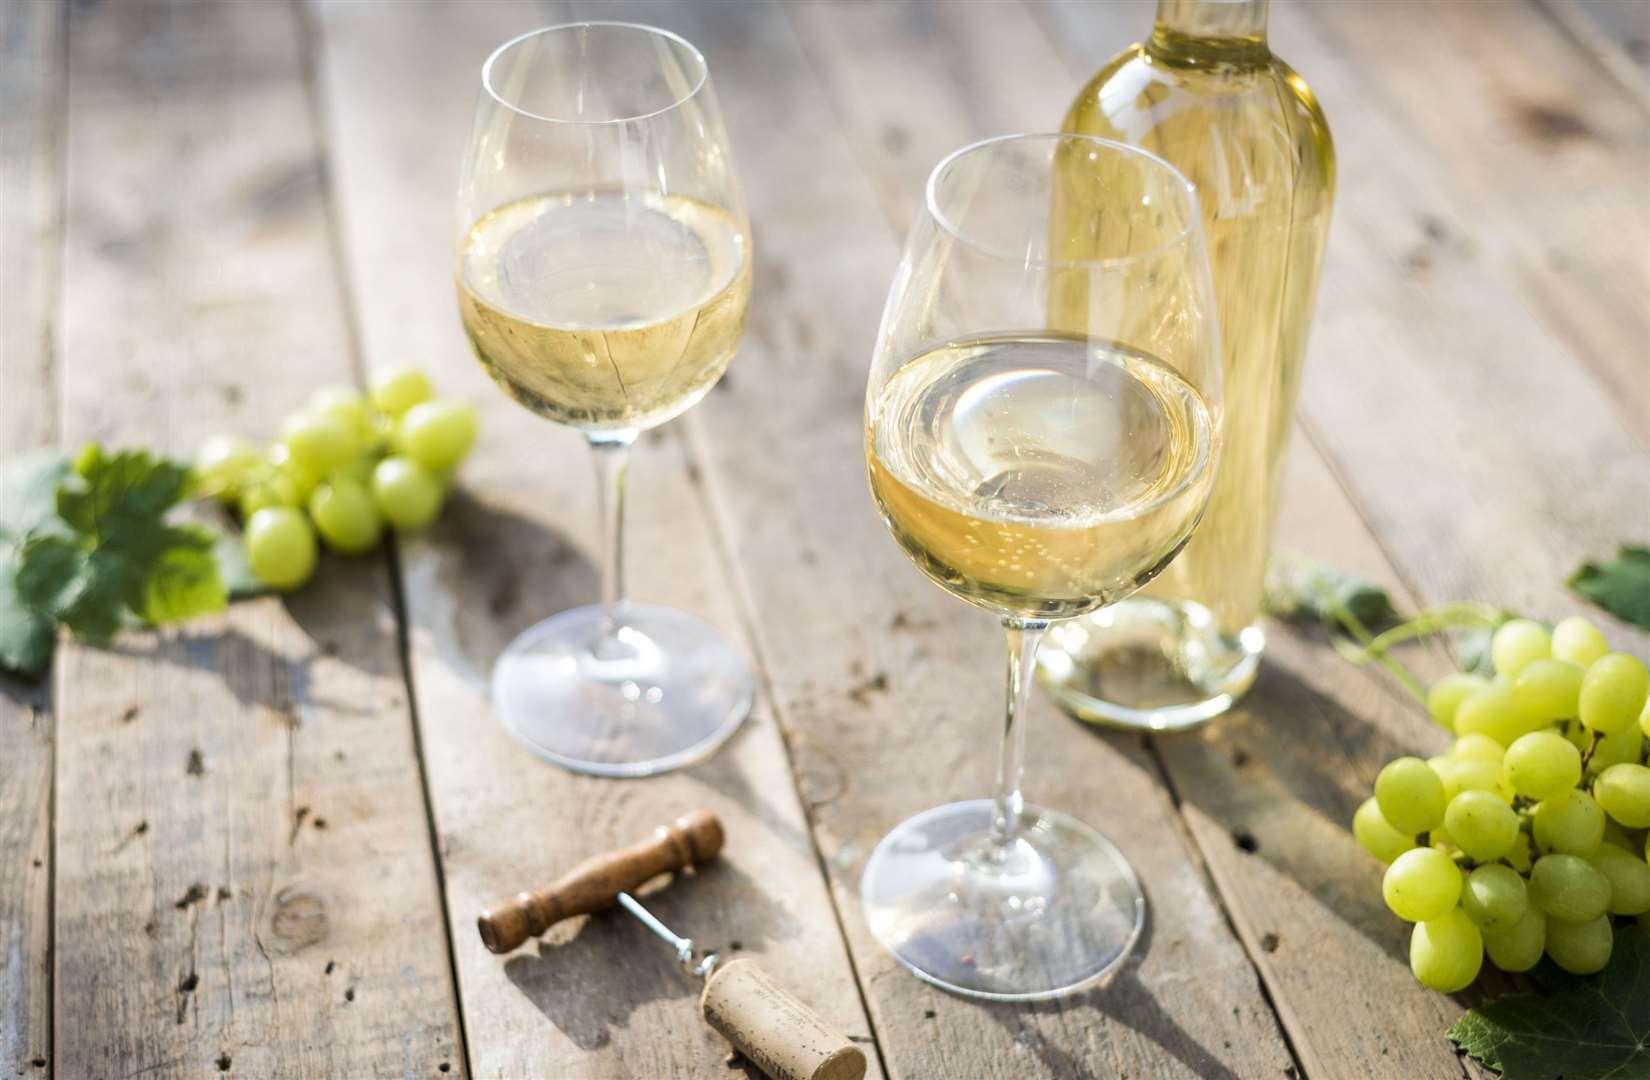 Celebrate wine this weekend at Rochester Cathedral